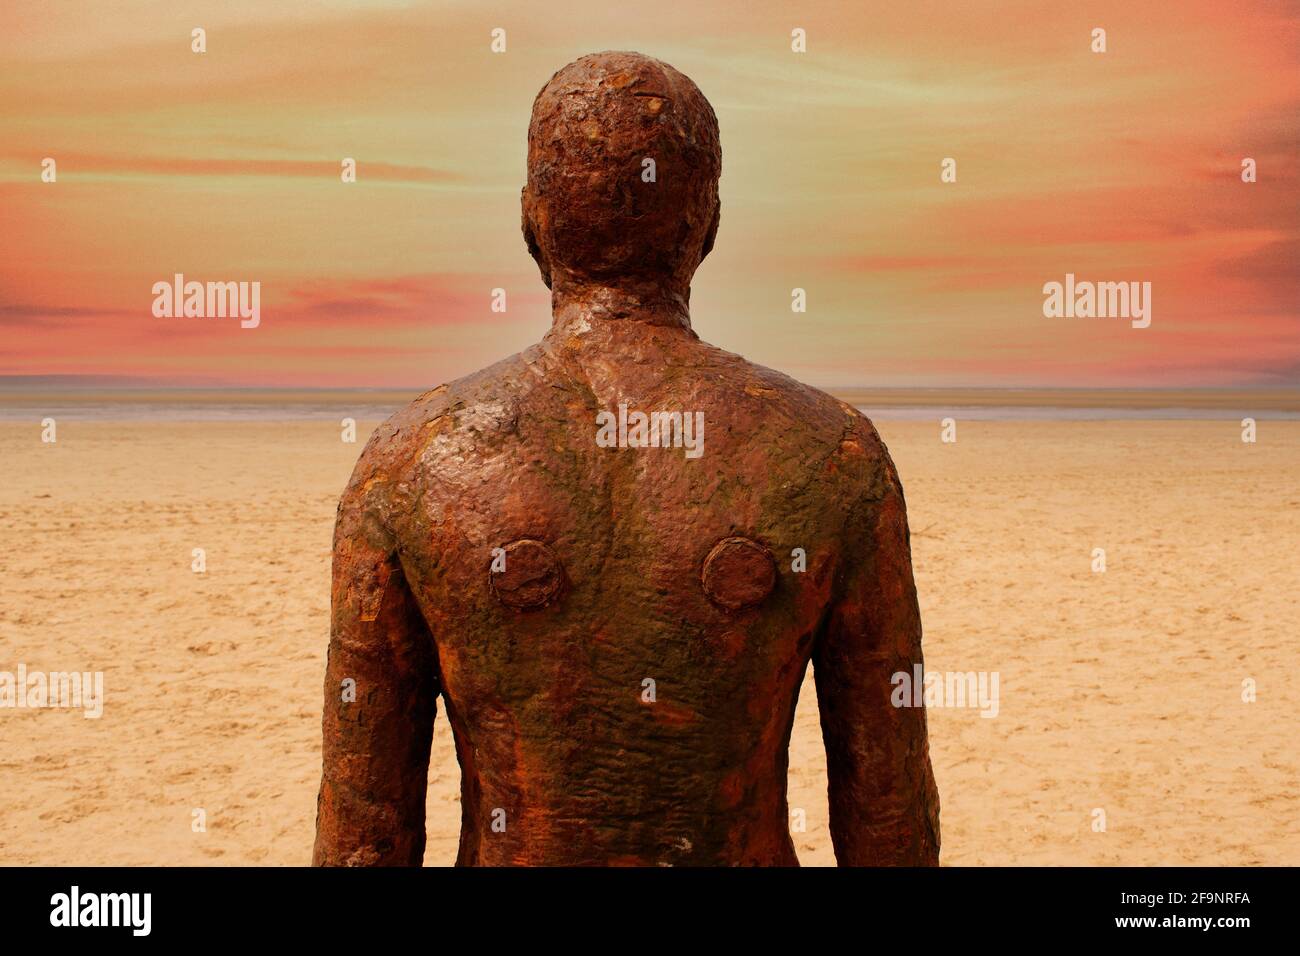 another place anthony gormley iron man sculpture at sunset on crosby beach near liverpool england Stock Photo